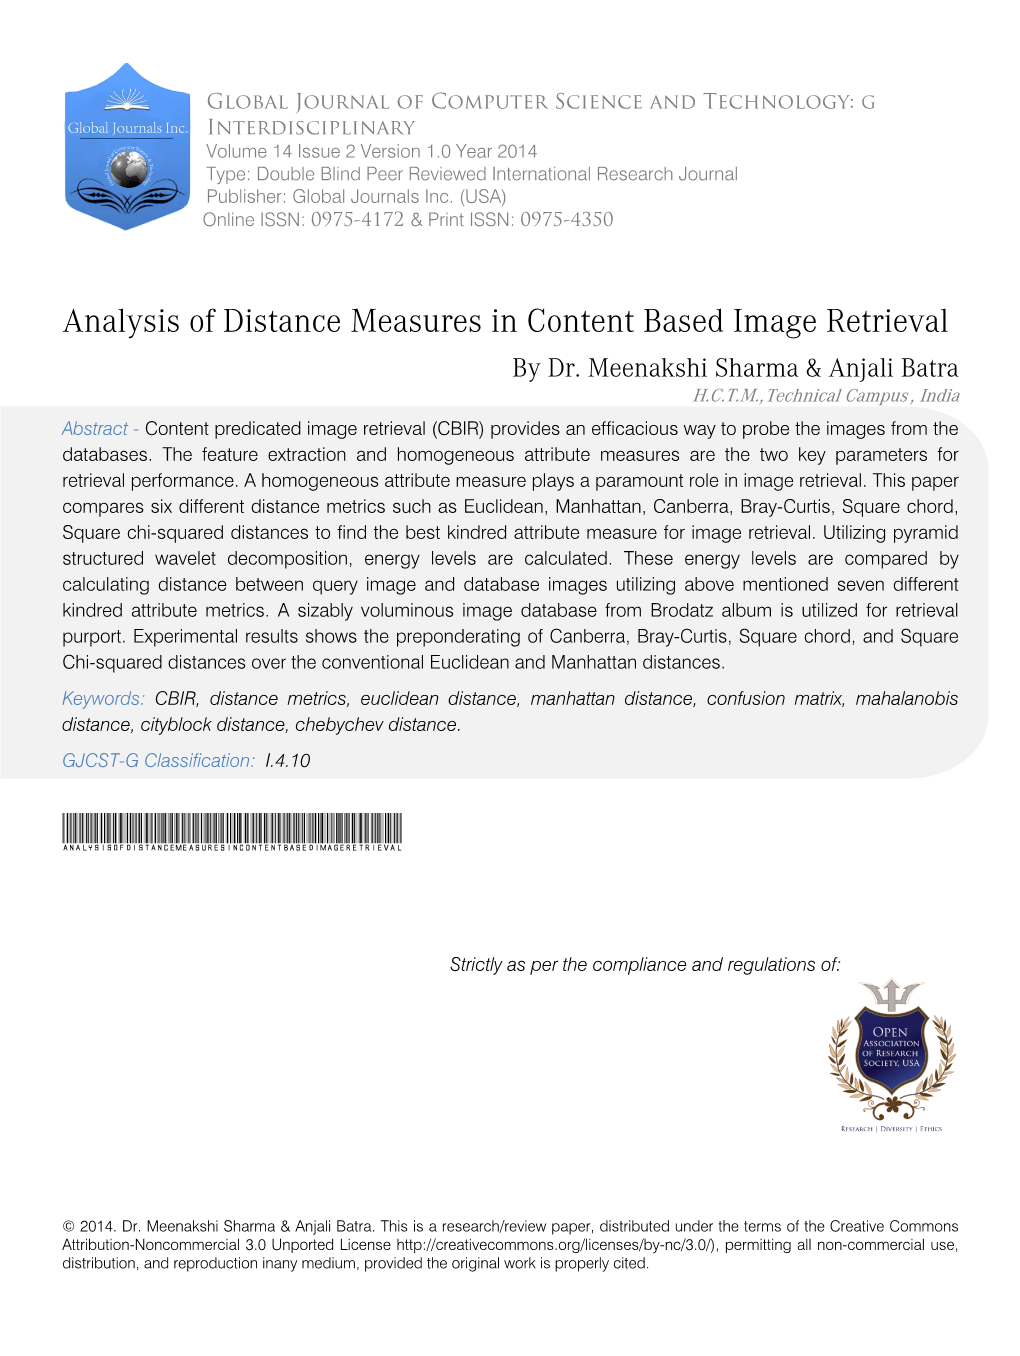 Analysis of Distance Measures in Content Based Image Retrieval by Dr